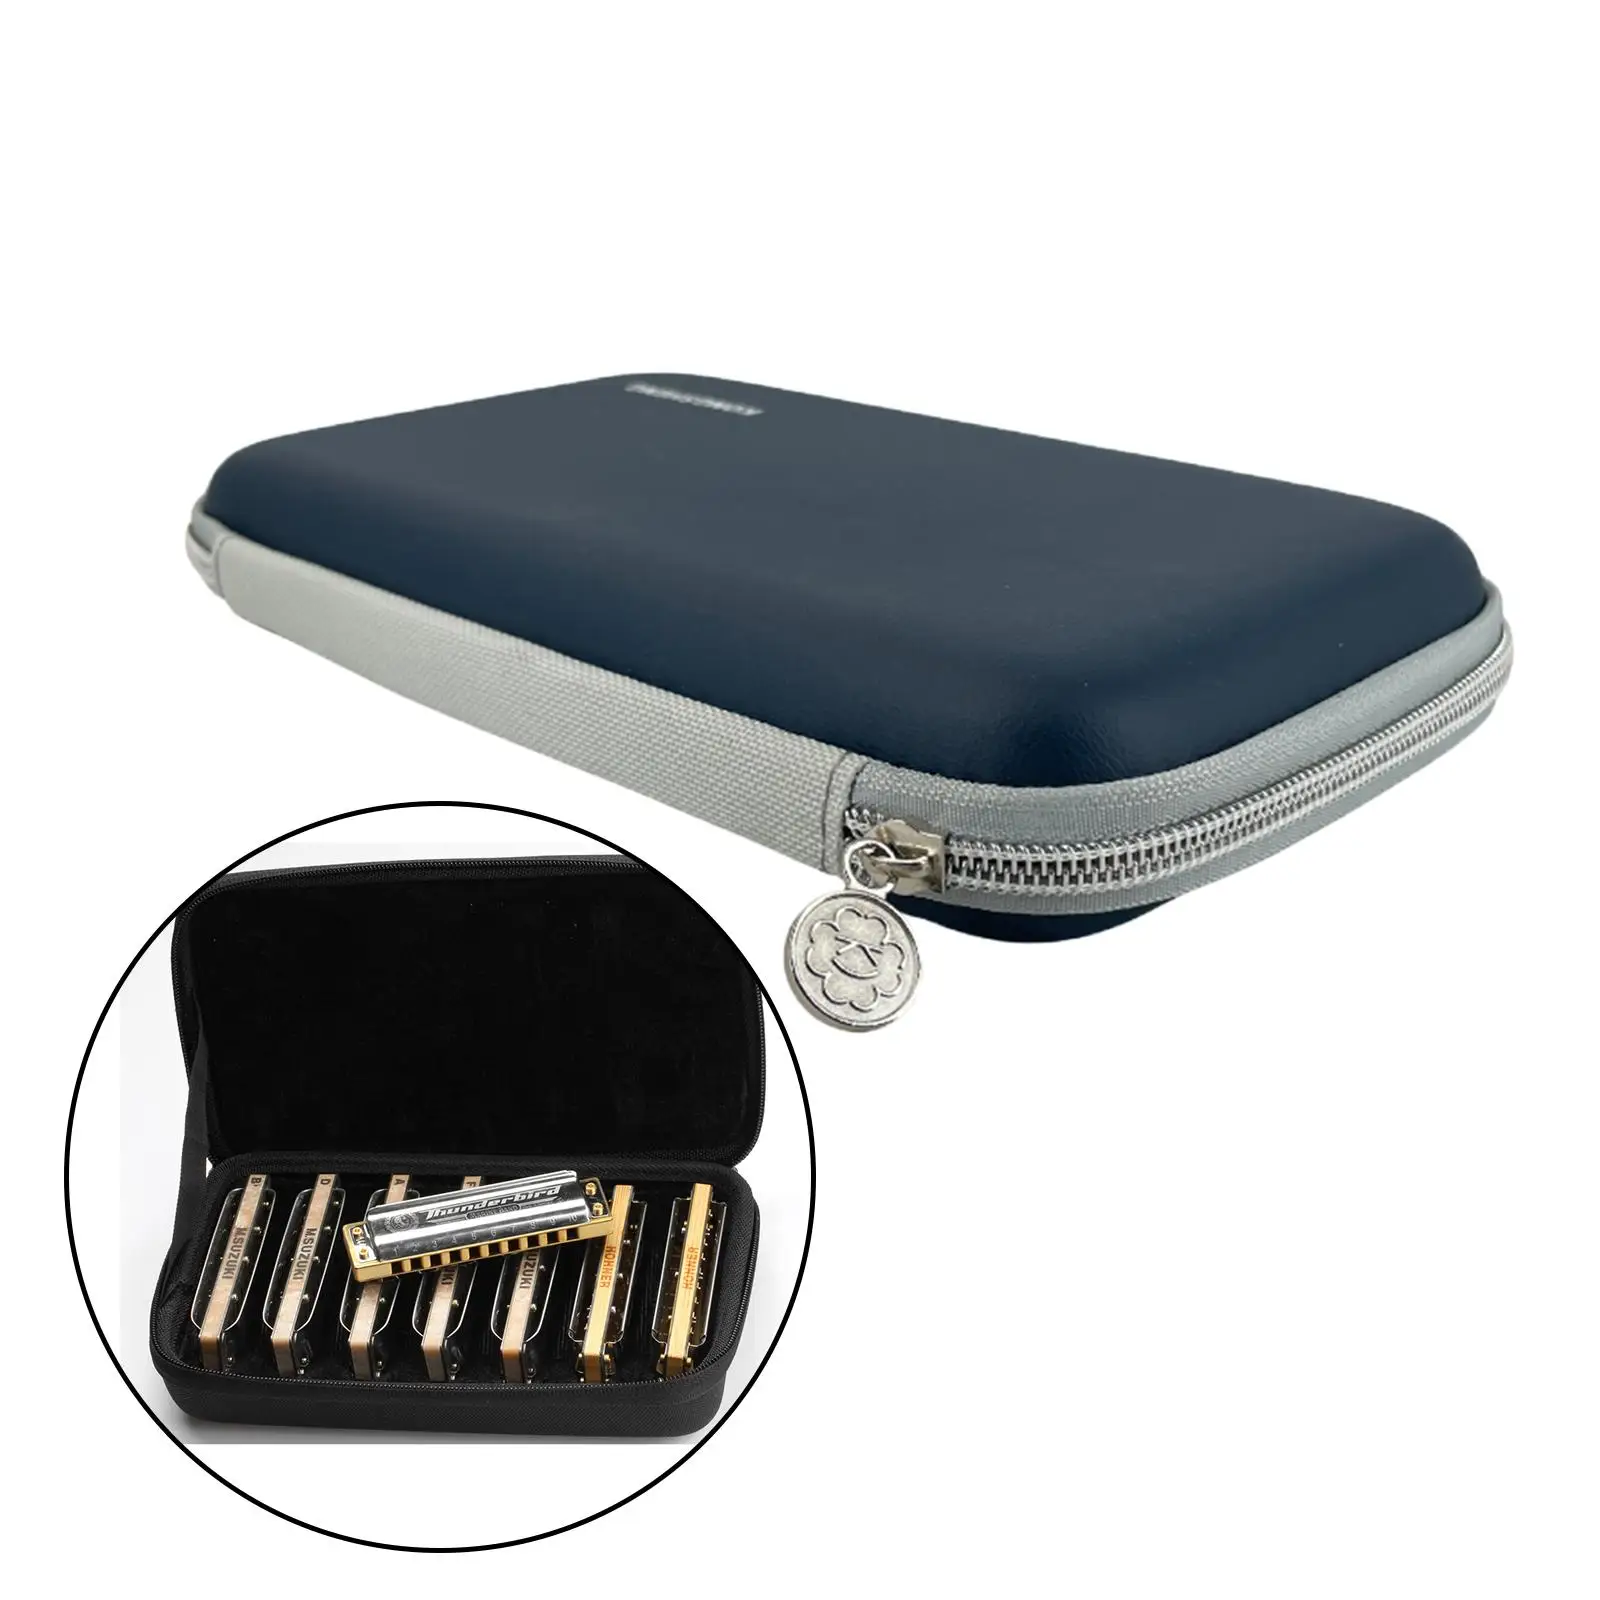 10 Holes Harmonica Storage Bag Holder Container for 7x Harmonicas Parts